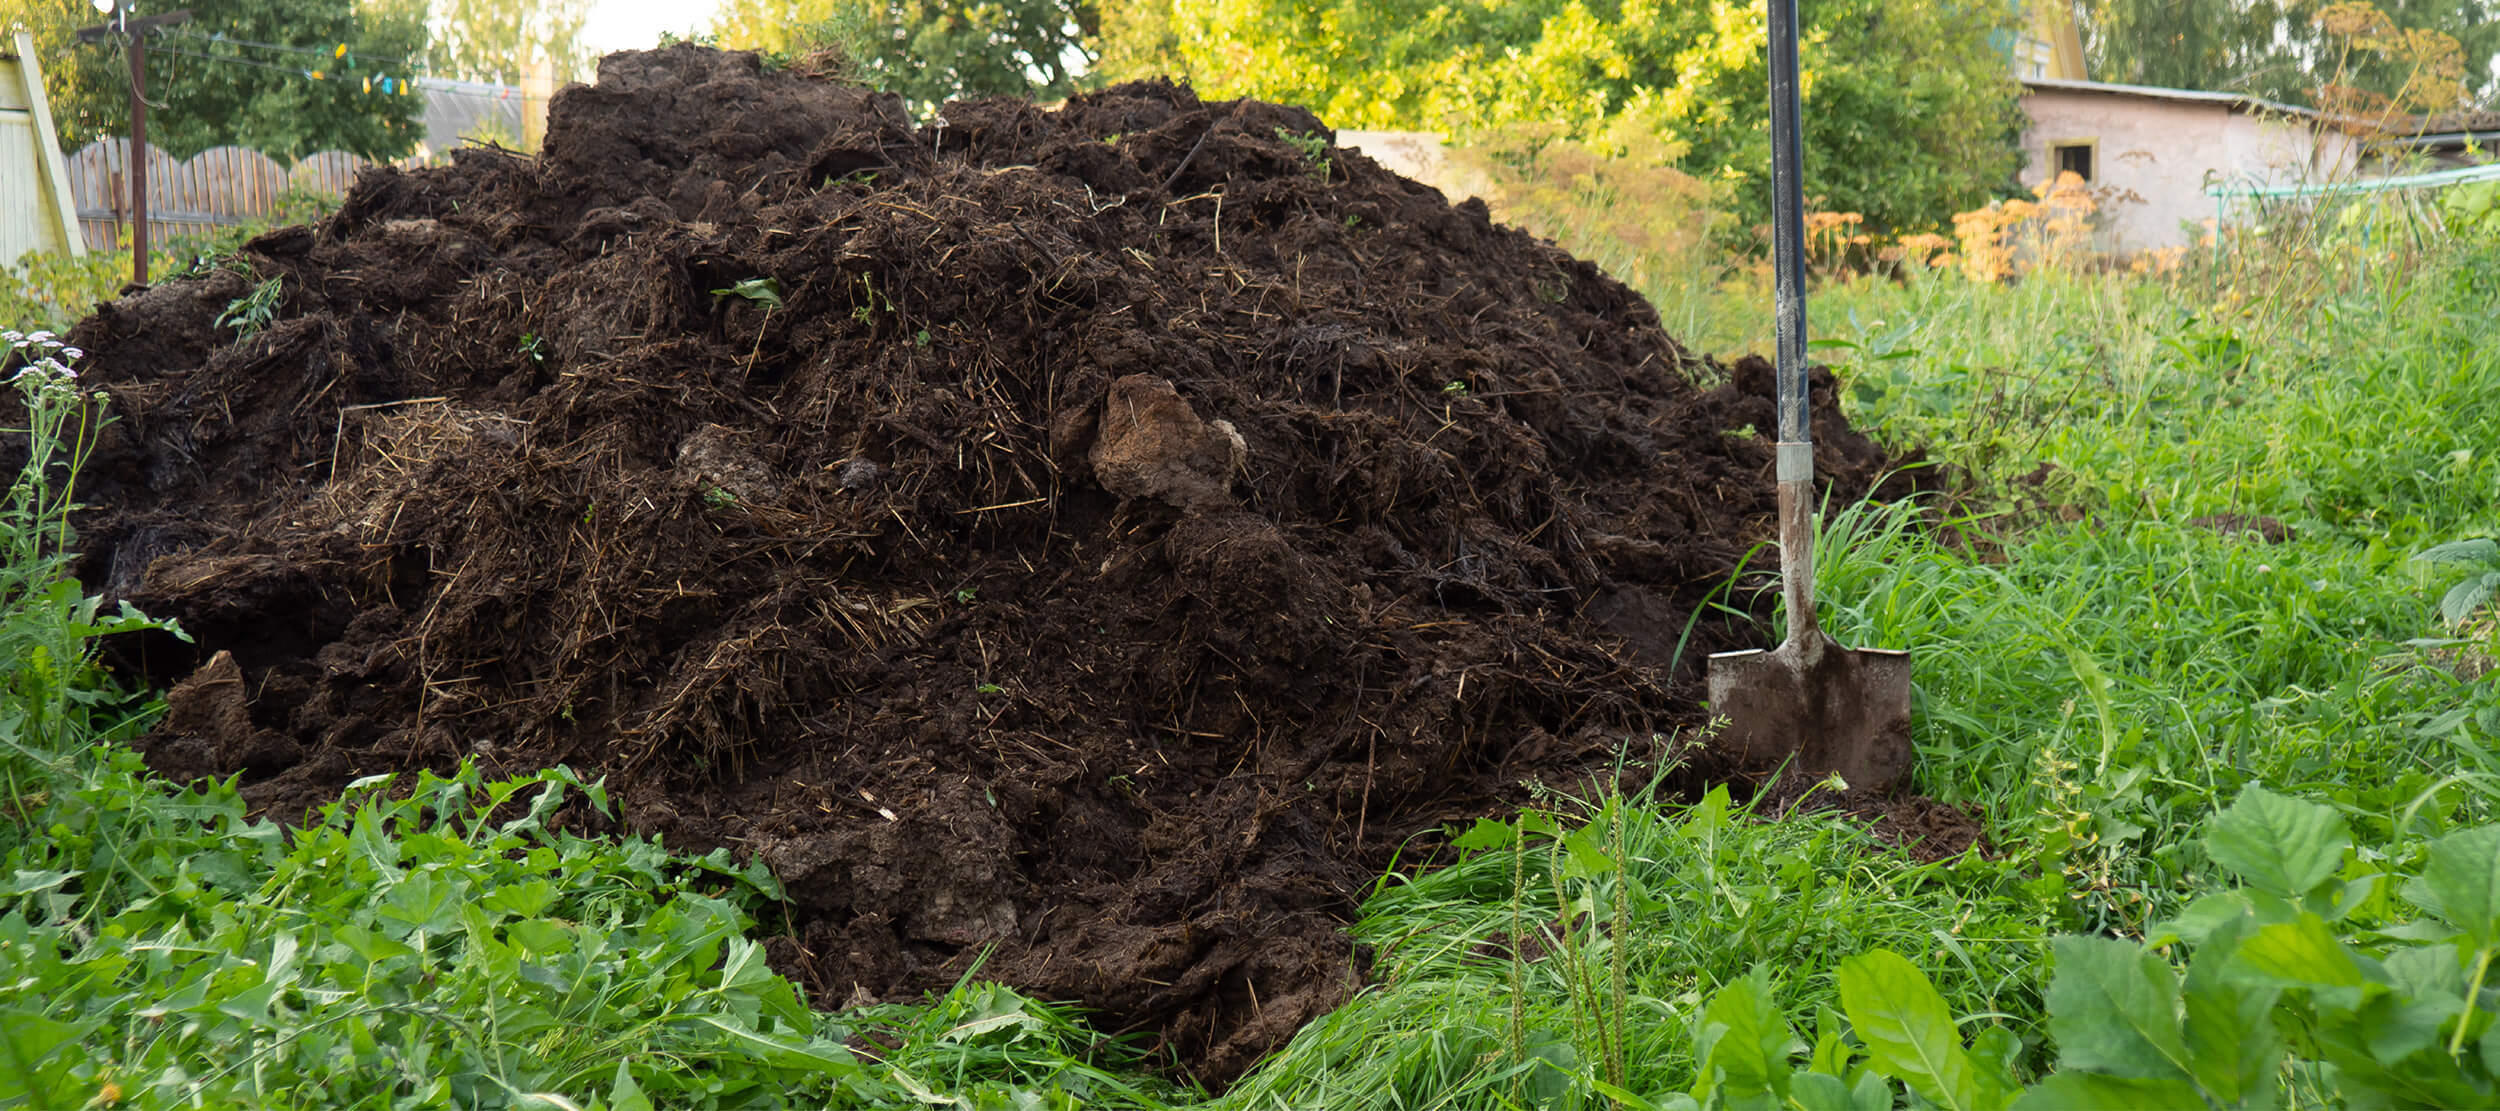 A pile of nutrient-rich composted soil.